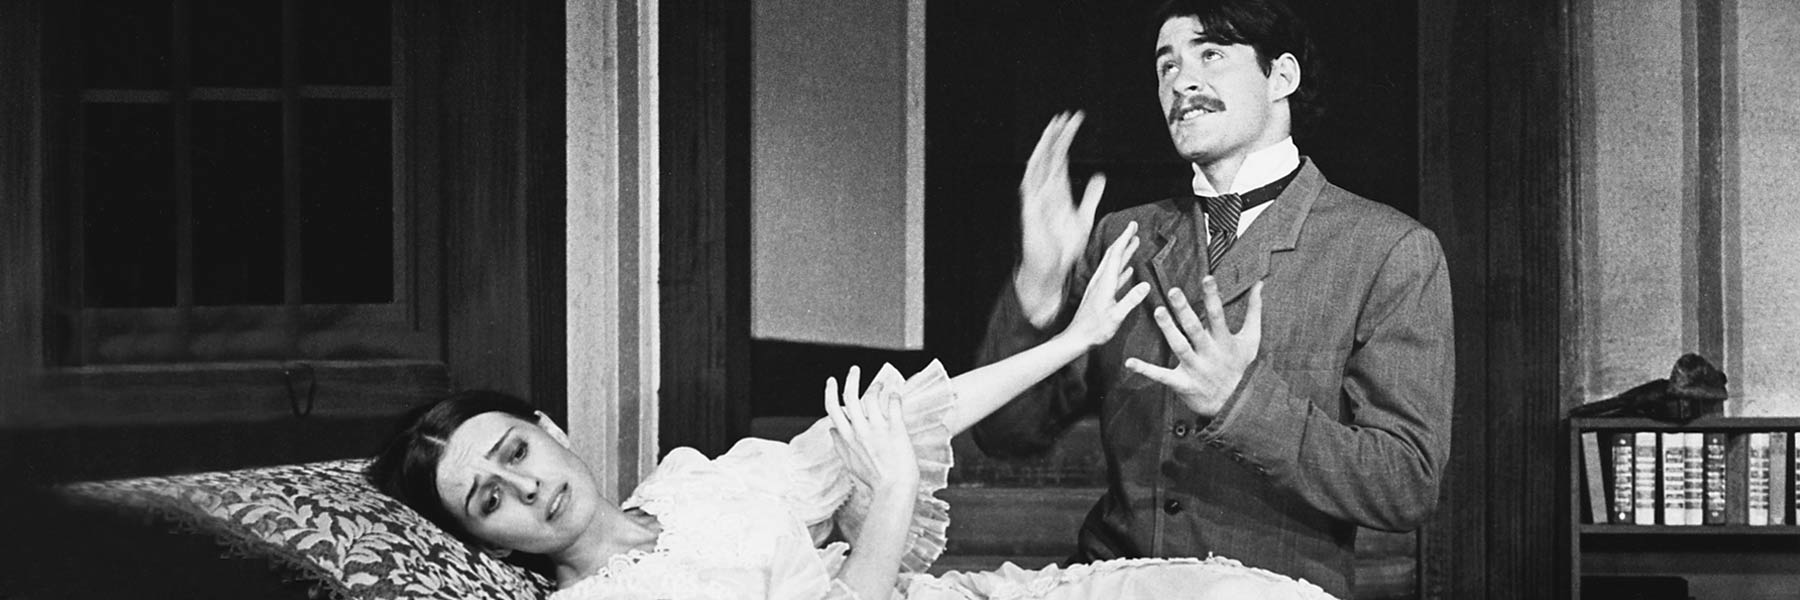 Actor Kevin Kline in a student play